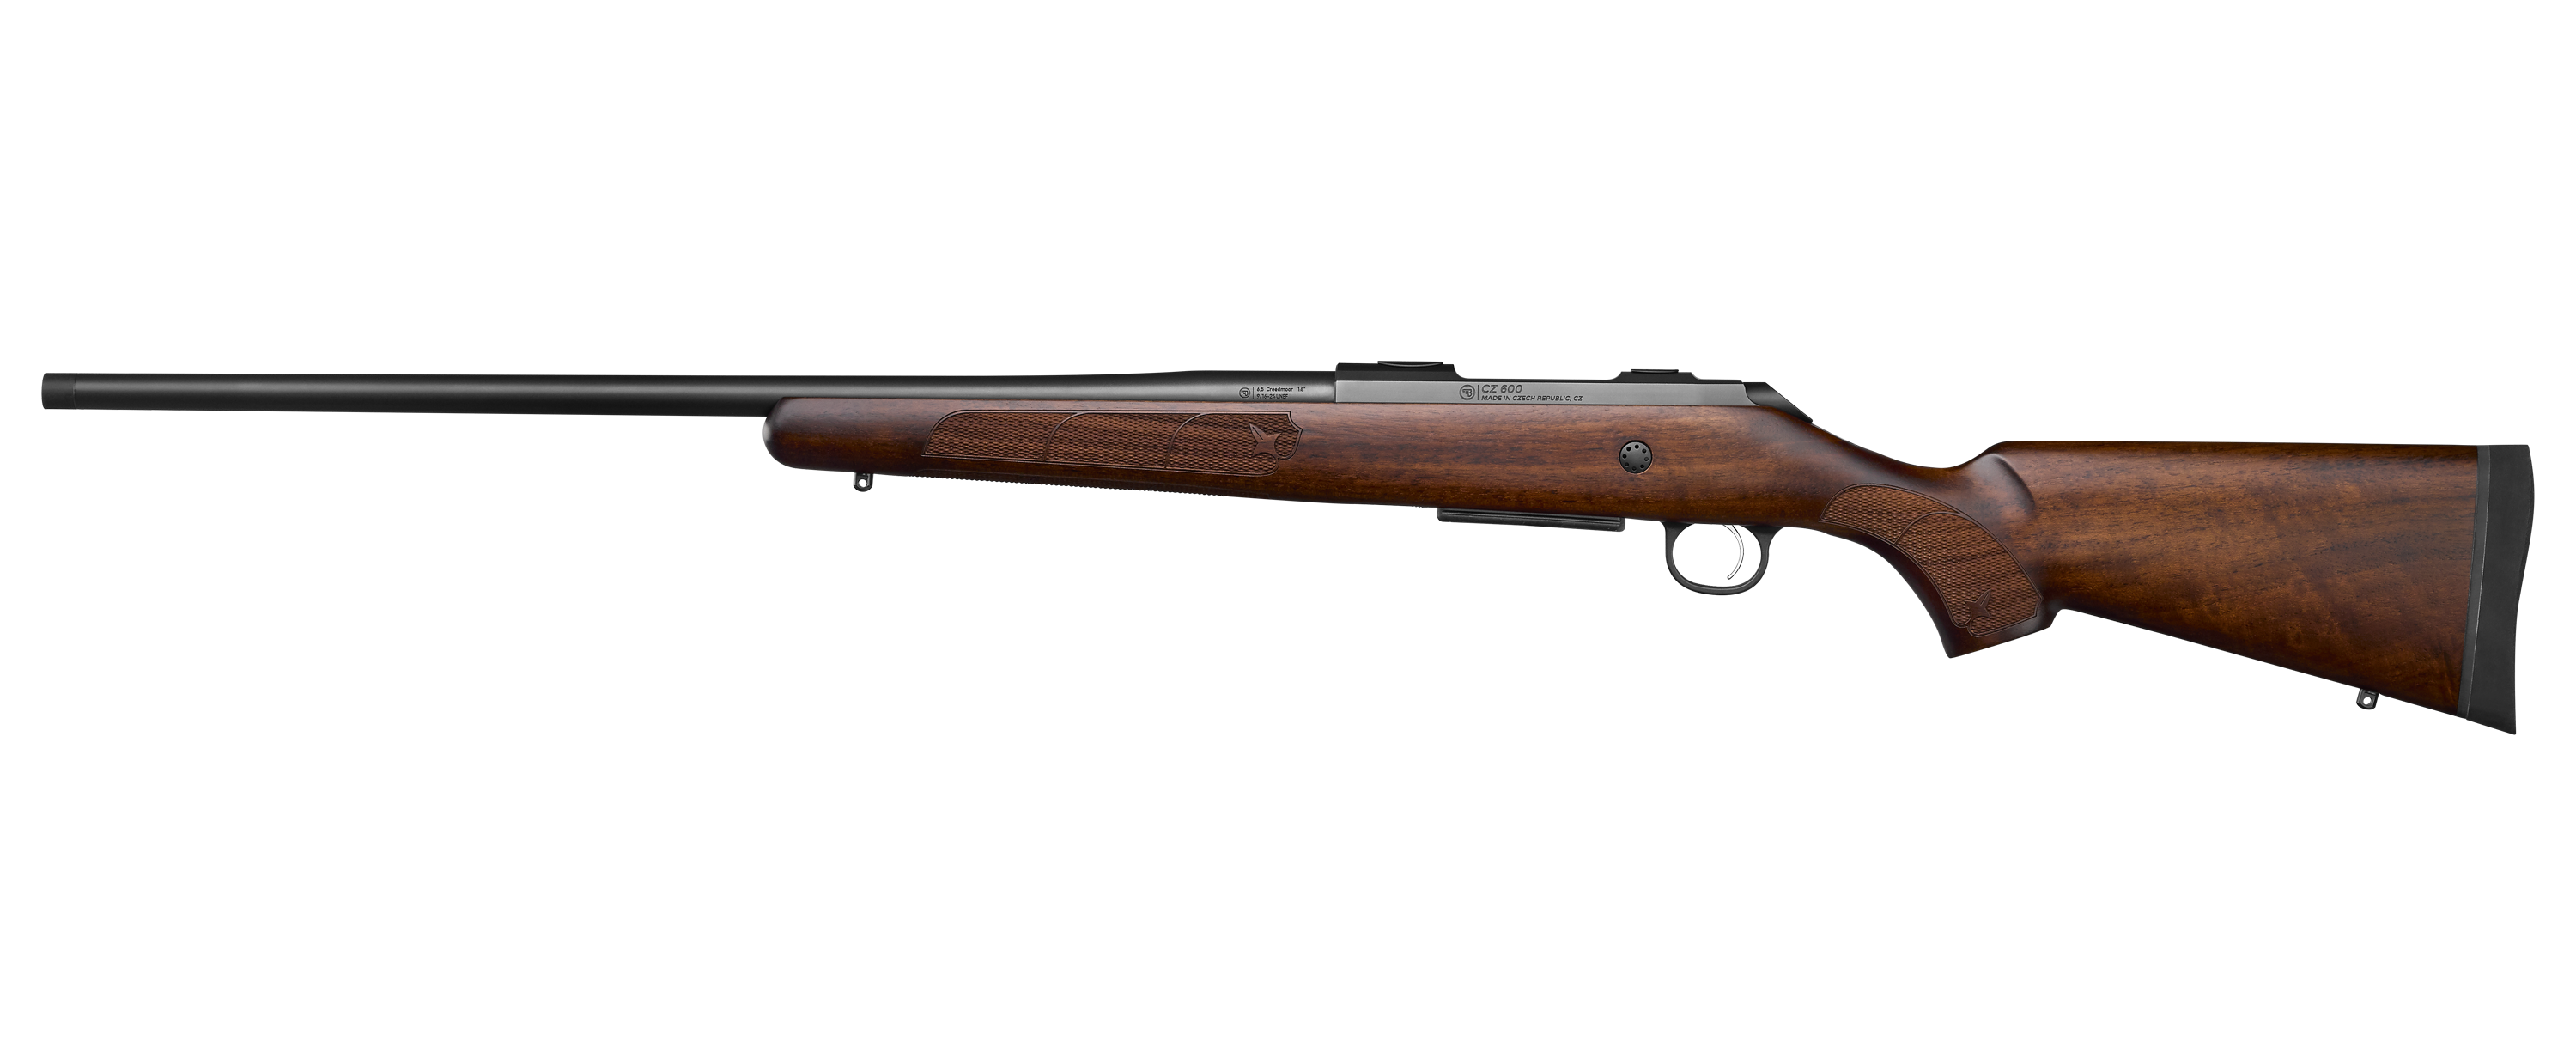 The CZ 600 Gets the Walnut Treatment - The CZ 600 American